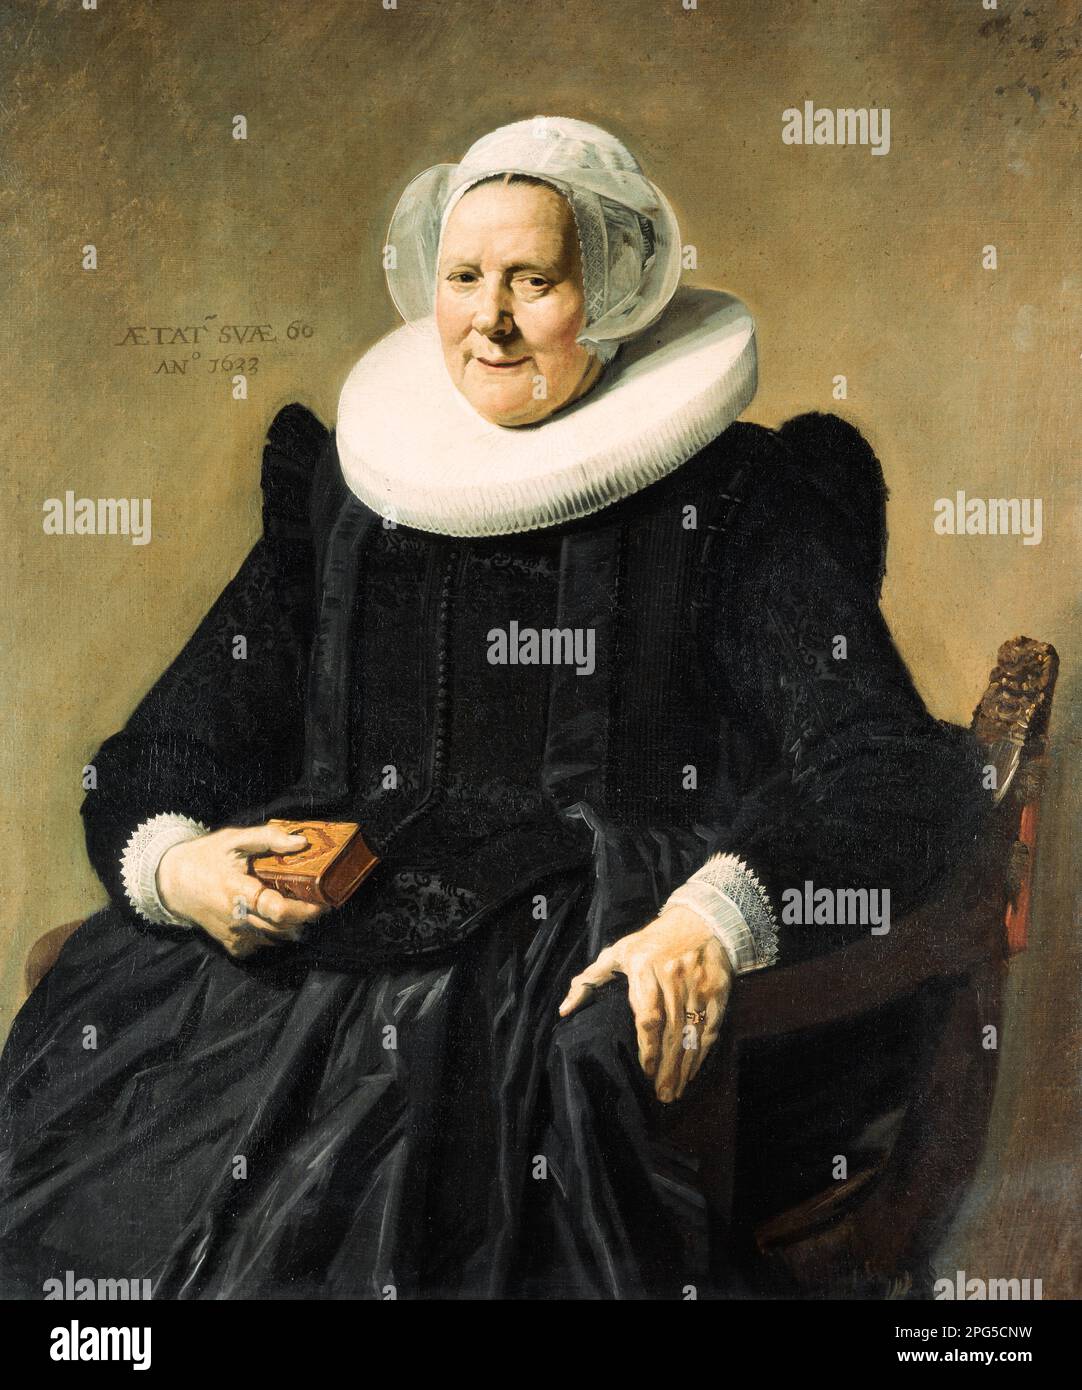 1600s 1633 PORTRAIT ELDERLY DUTCH LADY WEARING RUFF COLLAR AND CUFFS BY FRANS HALS DUTCH ARTIST OF 17TH CENTURY  - ka9285 SPL001 HARS ARTIST PAINTER DUTCH SENIOR ADULT EYE CONTACT SENIOR WOMAN HAPPINESS OLD AGE OLDSTERS OLDSTER STYLES AND CUFFS 17TH ELDERS BLACK DRESS BOOKLET STYLISH WORKED 1600s ELDERLY WOMAN FASHIONS RUFF CAUCASIAN ETHNICITY FRANS HALS HAARLEM INDIVIDUAL NETHERLANDS OLD FASHIONED THE ELDER Stock Photo